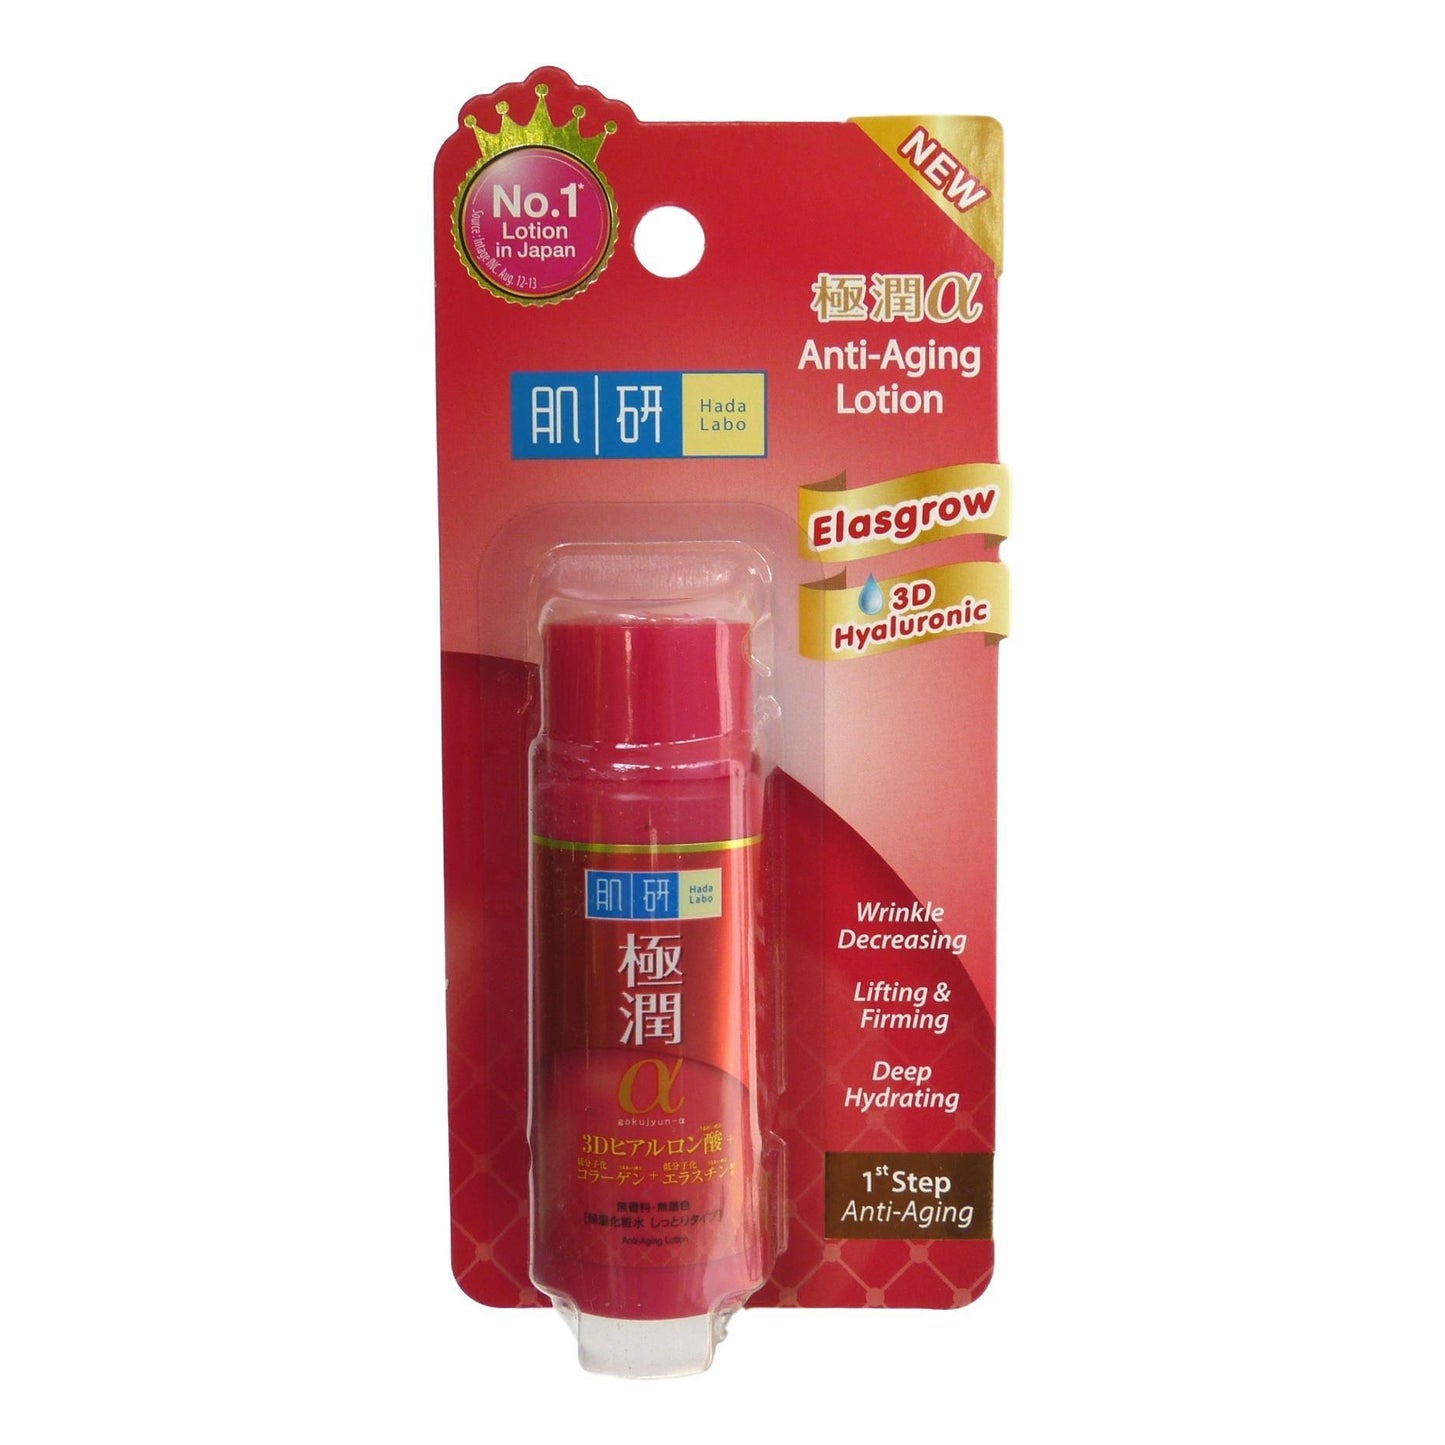 Hada Labo Anti Aging Lotion with Hyaluronic Acid 30ml - Asian Beauty Supply